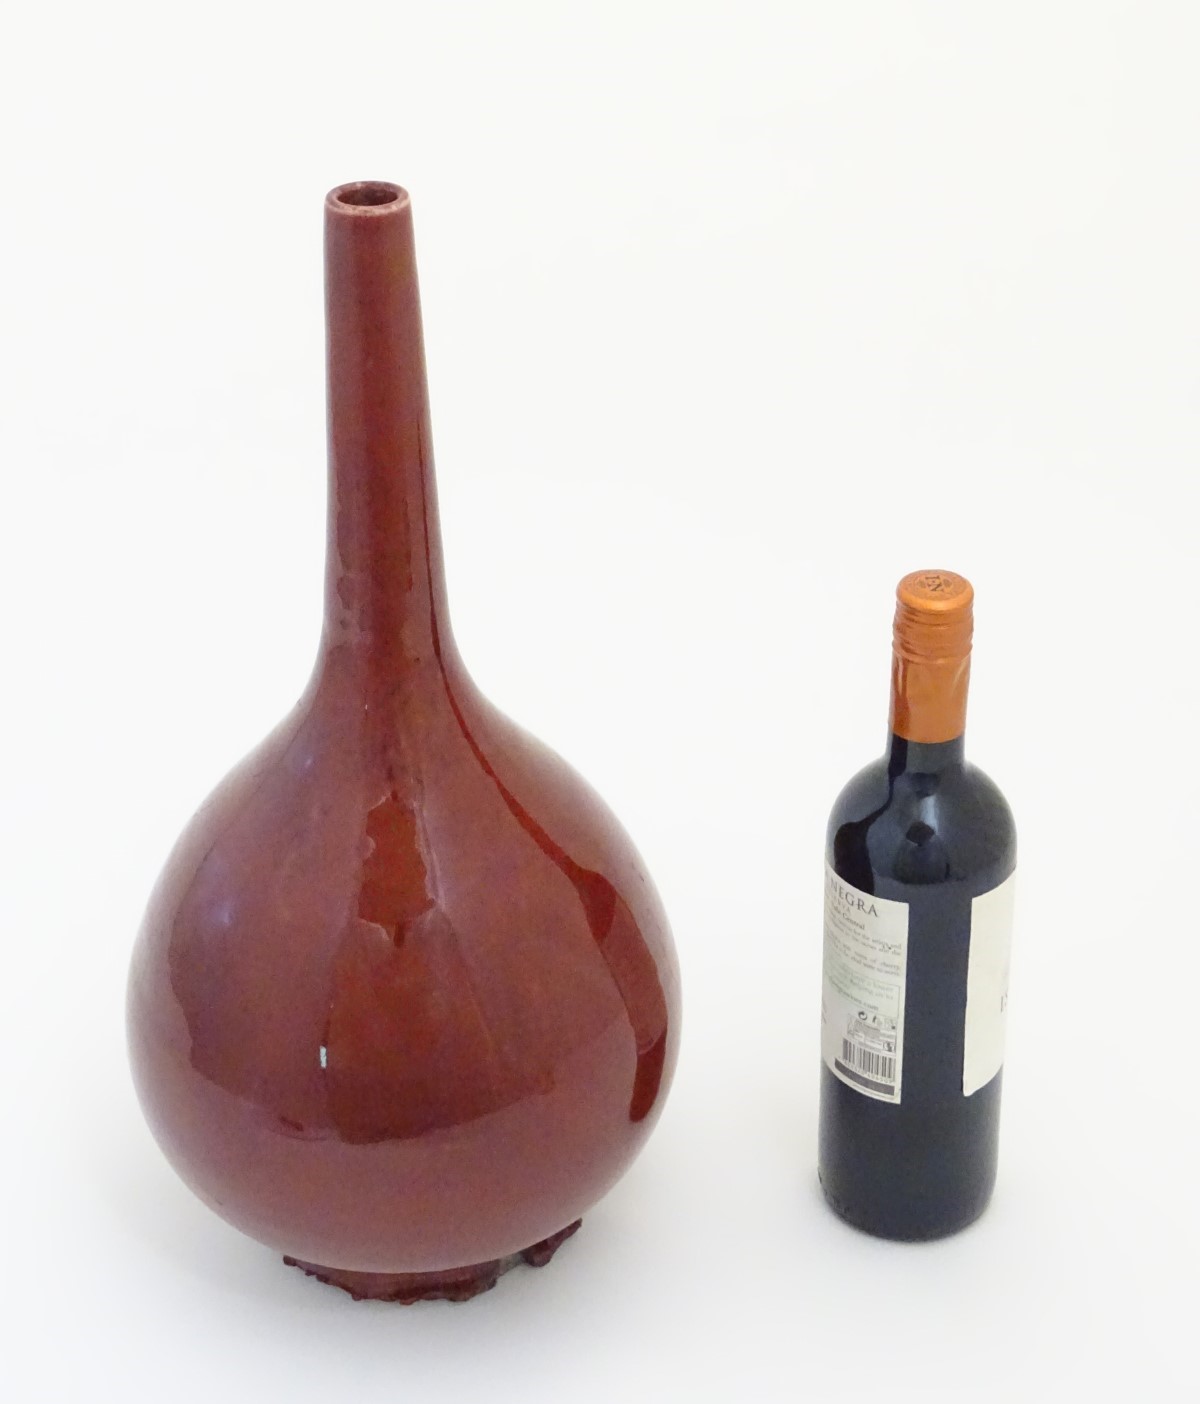 A Chinese pear-shaped vase with a slender, elongated neck with a sang de boeuf glaze. Approx. - Image 4 of 5